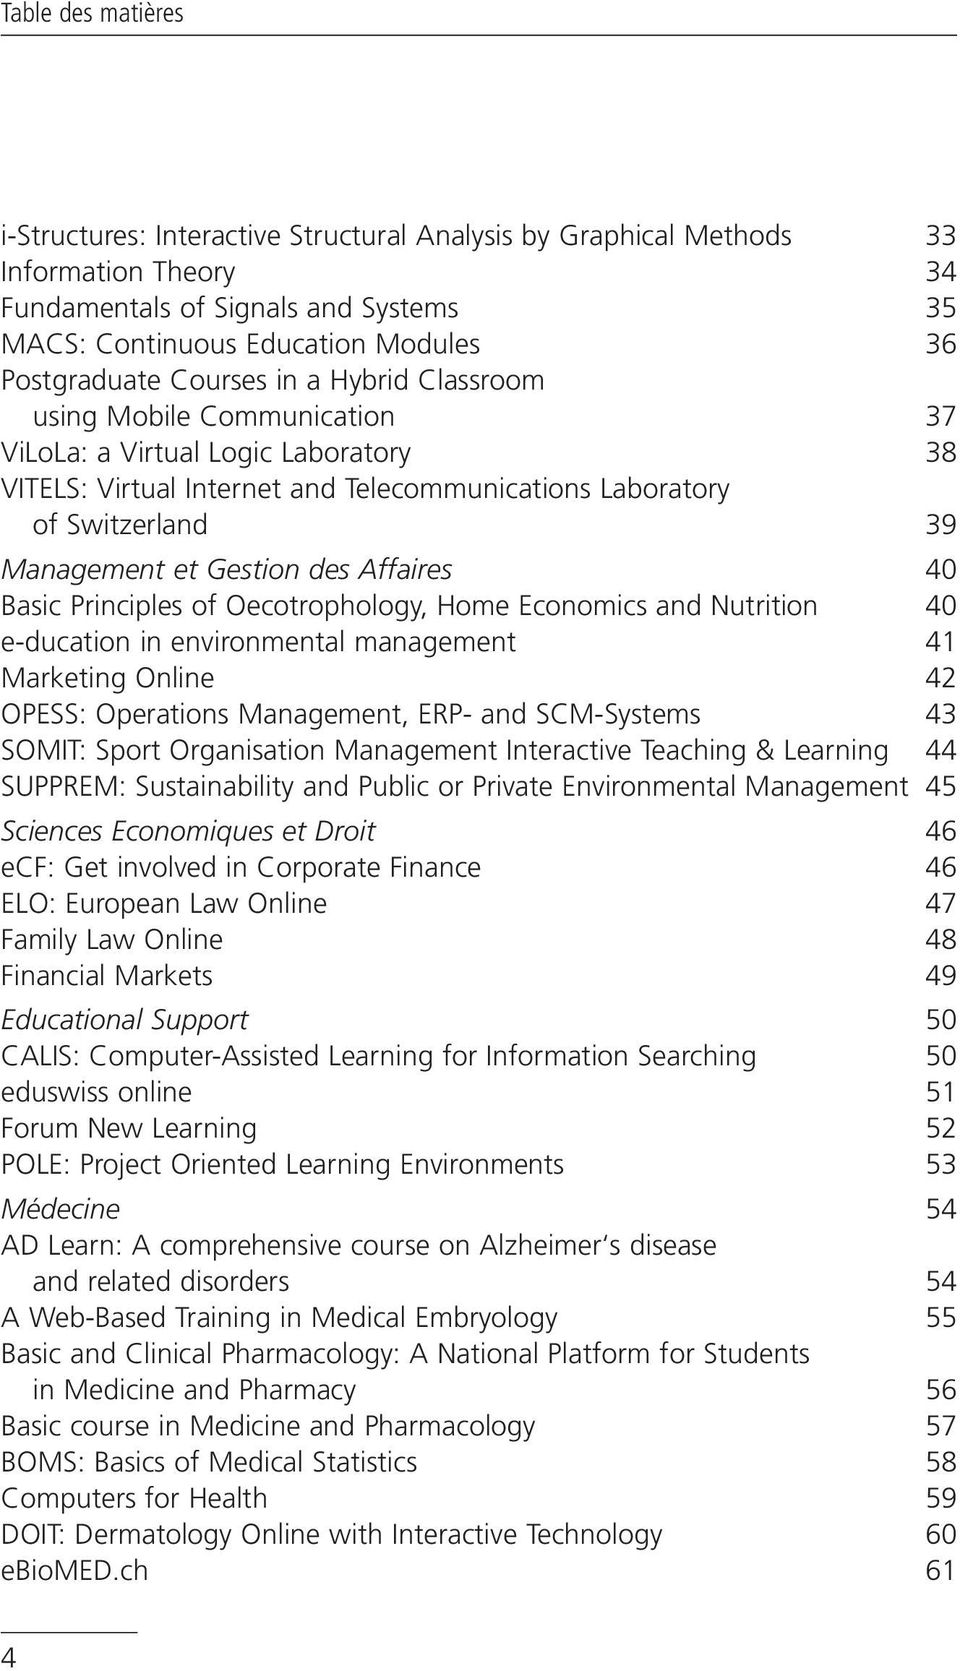 et Gestion des Affaires 40 Basic Principles of Oecotrophology, Home Economics and Nutrition 40 e-ducation in environmental management 41 Marketing Online 42 OPESS: Operations Management, ERP- and